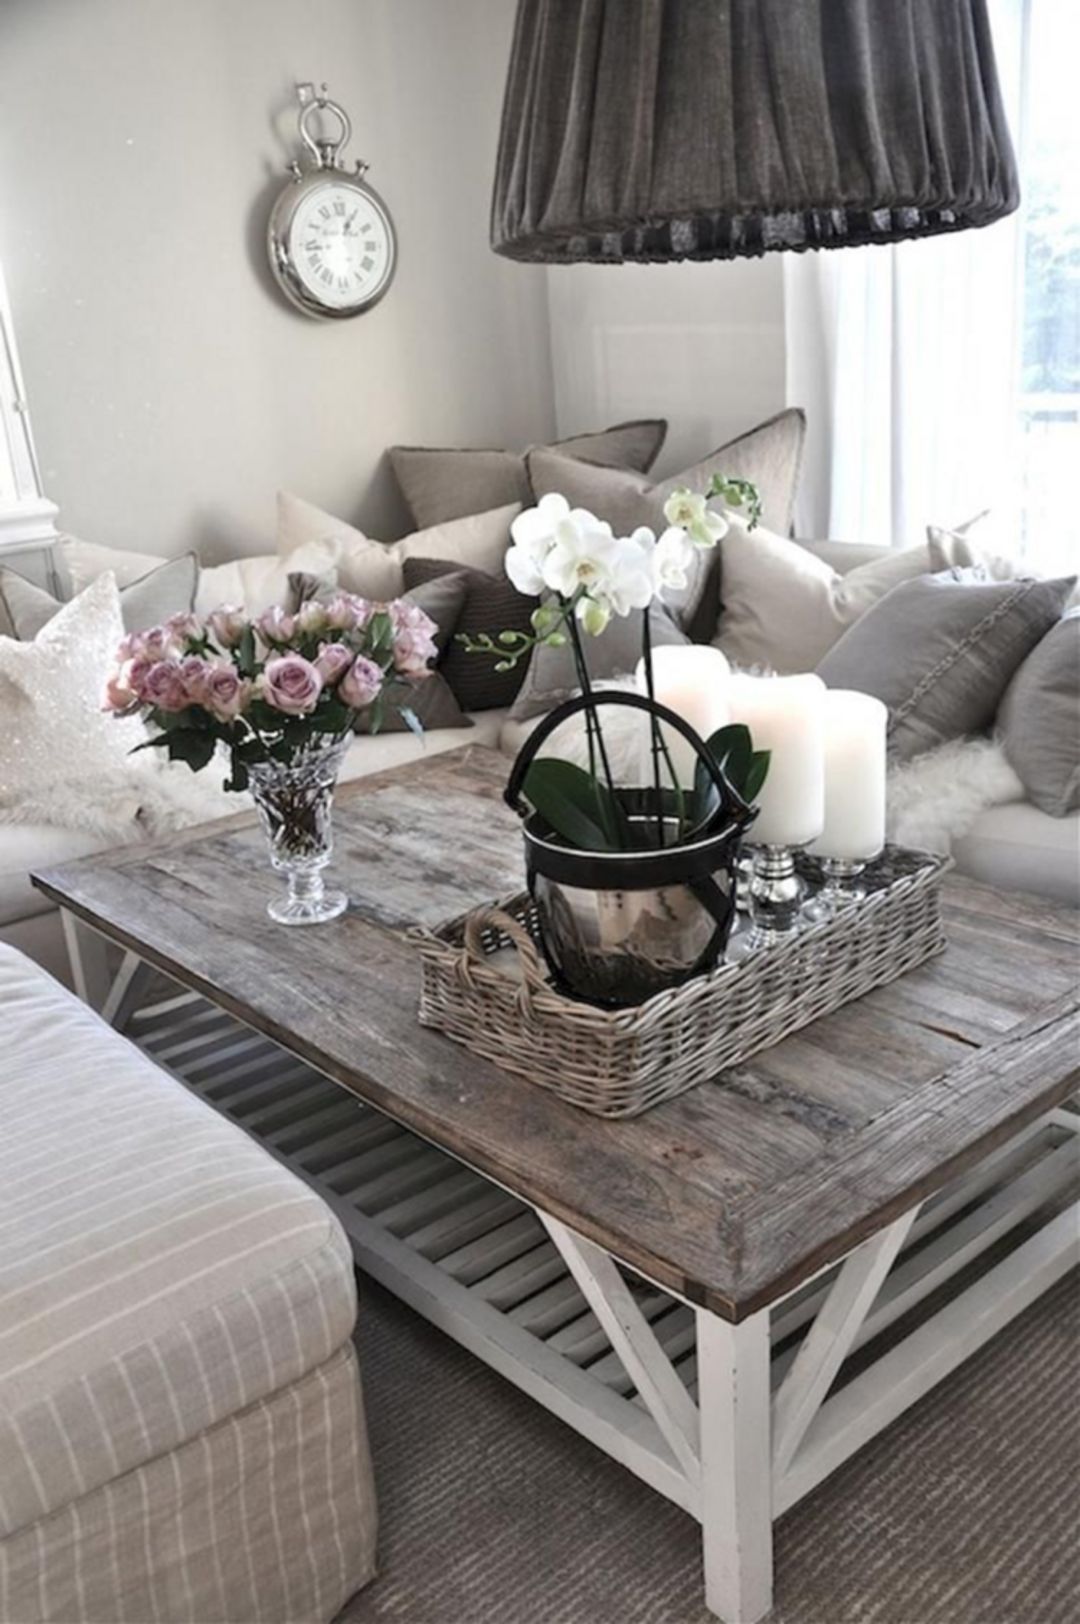 Adorable 25+ Great Farmhouse Coffee Table Design And Decor Ideas Https Intended For Living Room Farmhouse Coffee Tables (View 3 of 15)